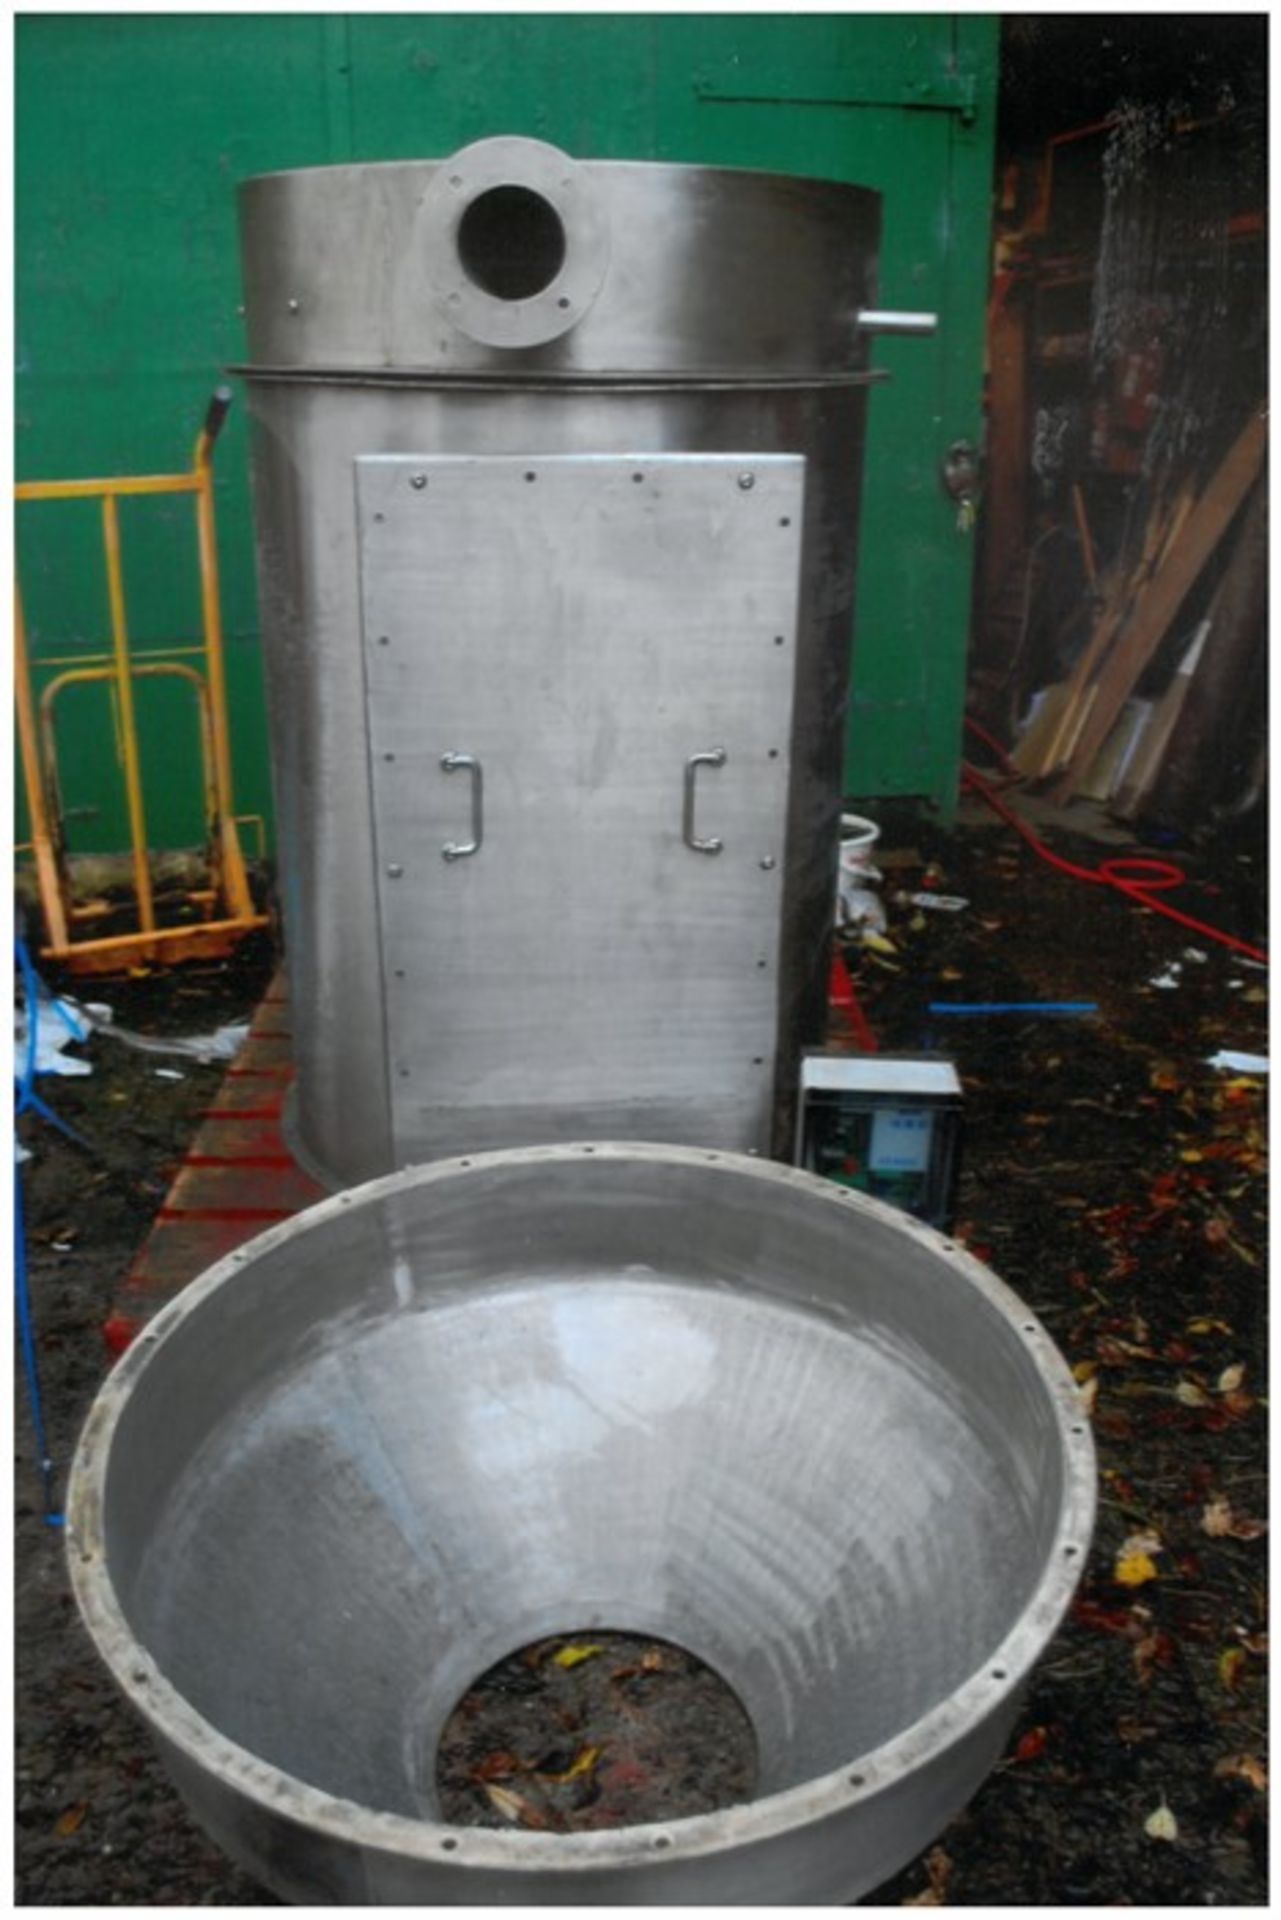 Stainless Steel Receiving Dust Filter Unit Pod, bo - Image 3 of 4